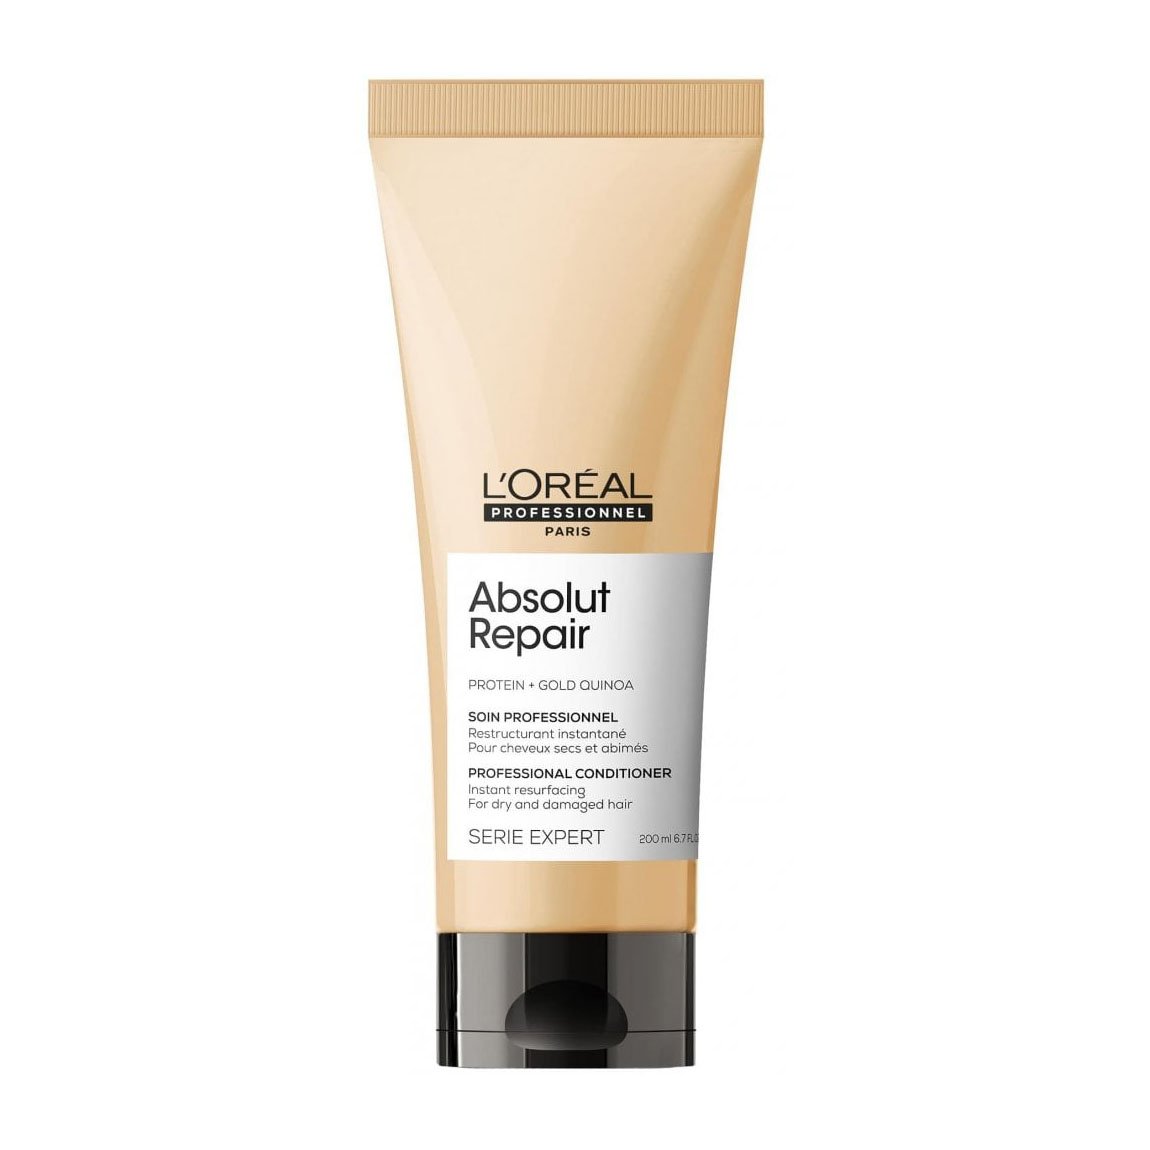 L’Oreal Professional Absolut Repair Gold Quinoa + Protein Conditioner - 200ml - Bloom Pharmacy